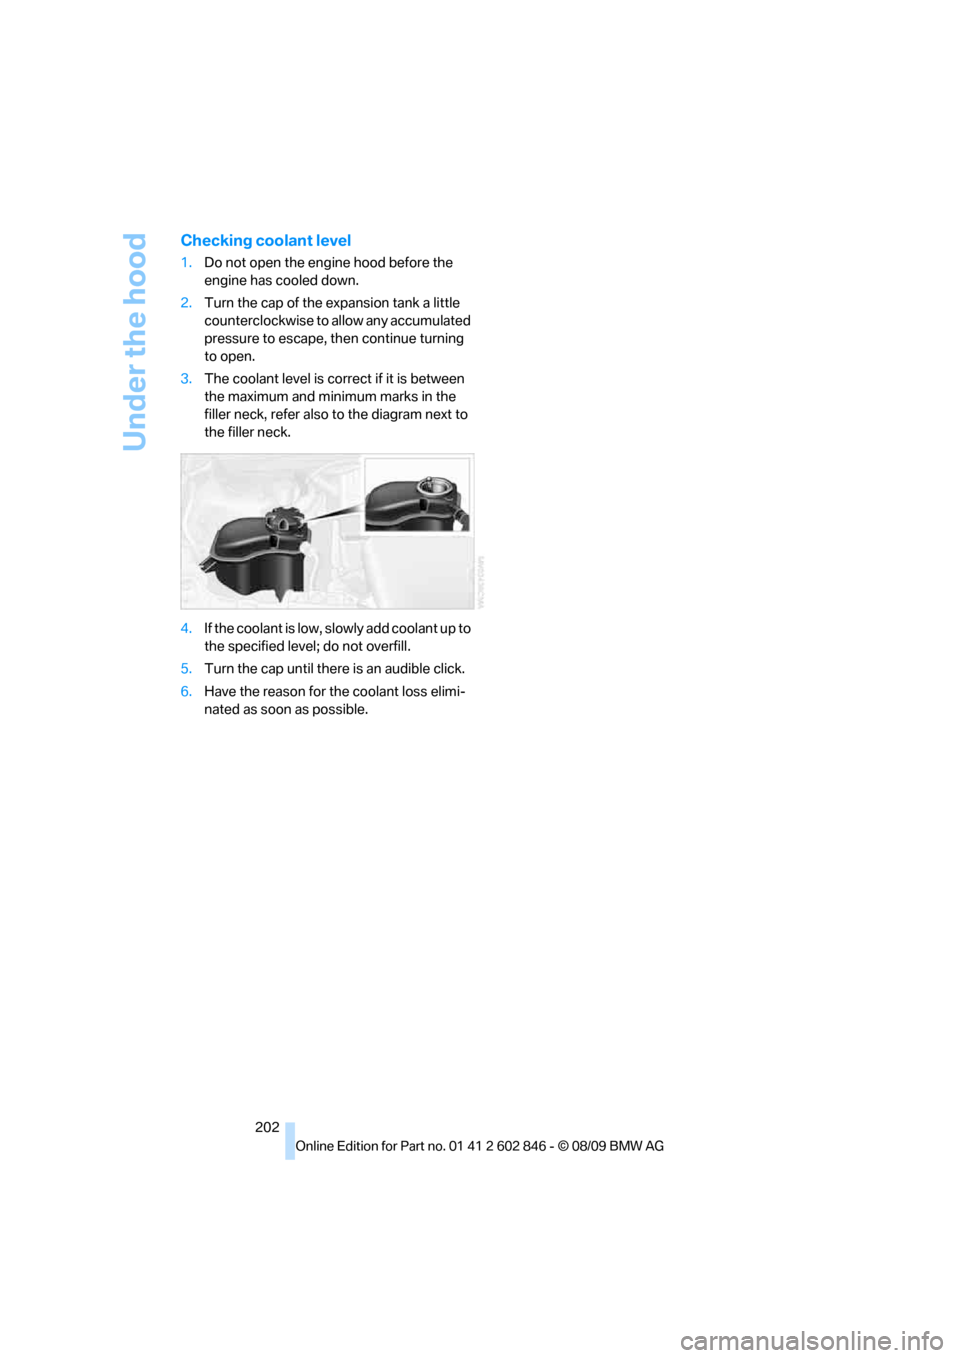 BMW 128I 2010 E81 Service Manual Under the hood
202
Checking coolant level
1.Do not open the engine hood before the 
engine has cooled down.
2.Turn the cap of the expansion tank a little 
counterclockwise to allow any accumulated 
pr